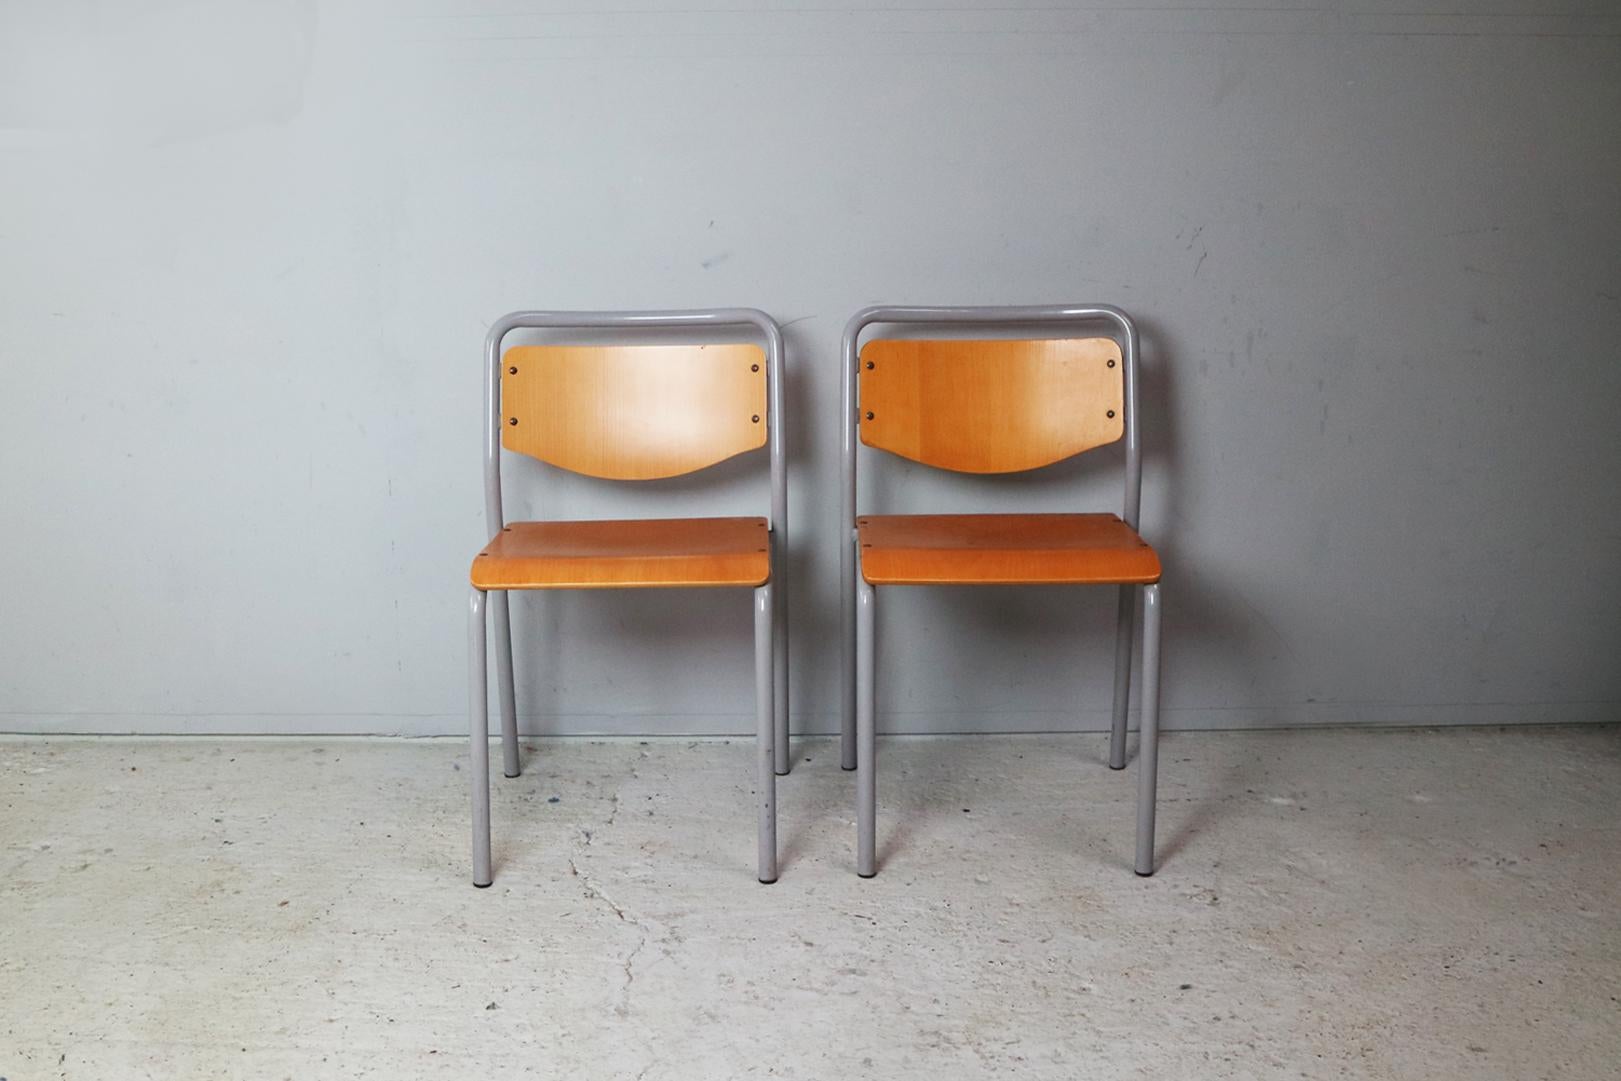 Great Scandinavian stacking functional / industrial style. Grey painted tubular metal frames with bent beech seat and back rest. Riveted detailing. The nice detail of an extending bar at the rear of the seat. Very sturdy and incredibly well